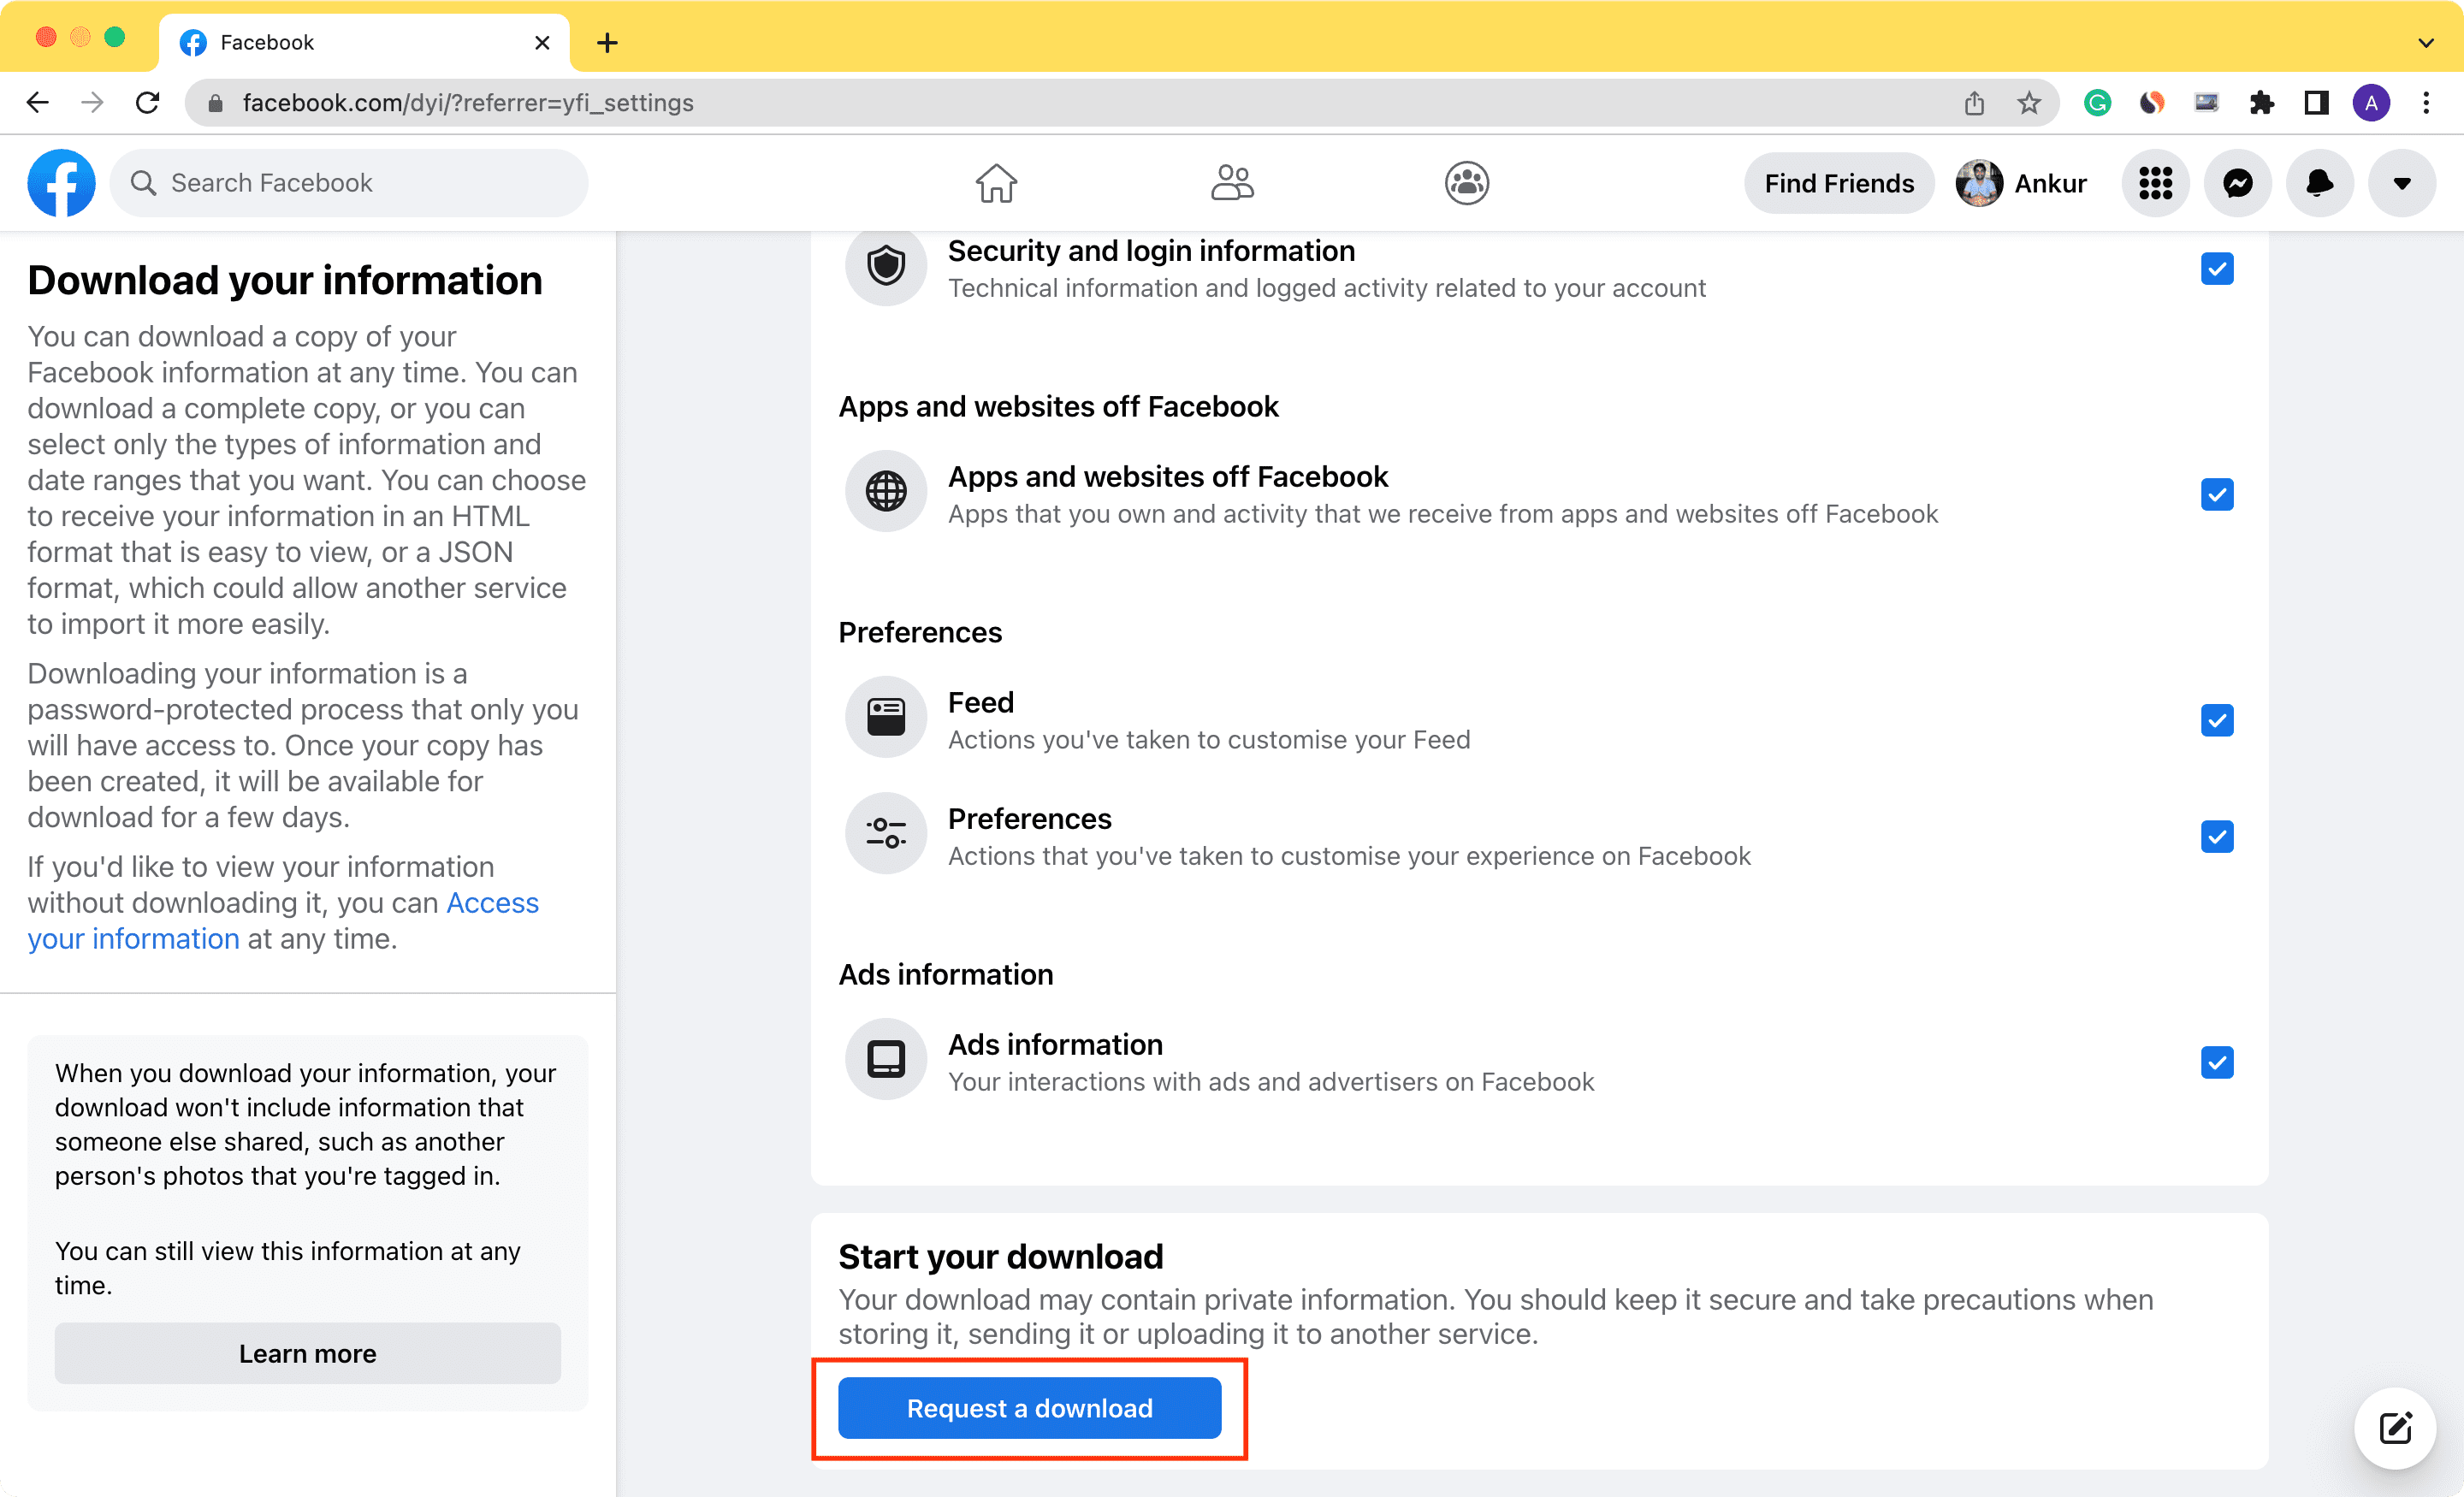 Request a download of your Facebook data